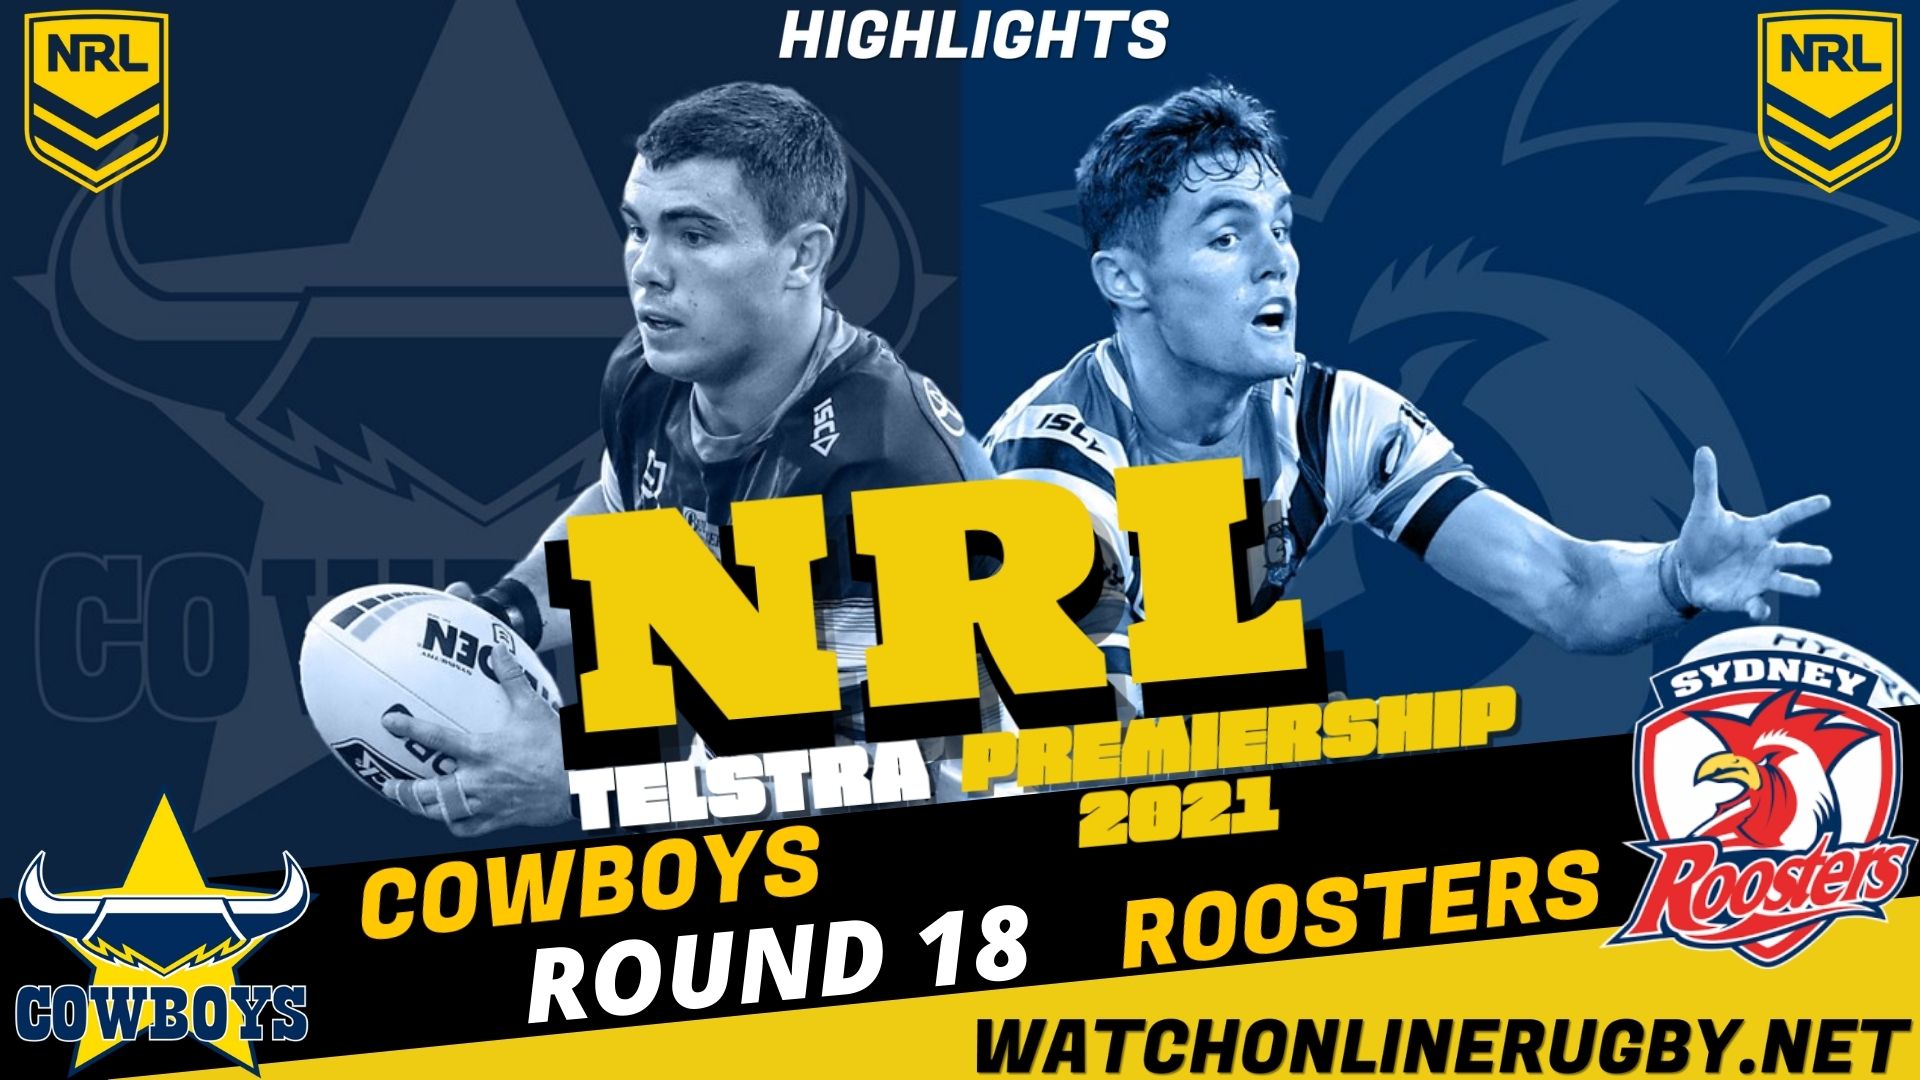 Cowboys Vs Roosters Highlights RD 18 NRL Rugby